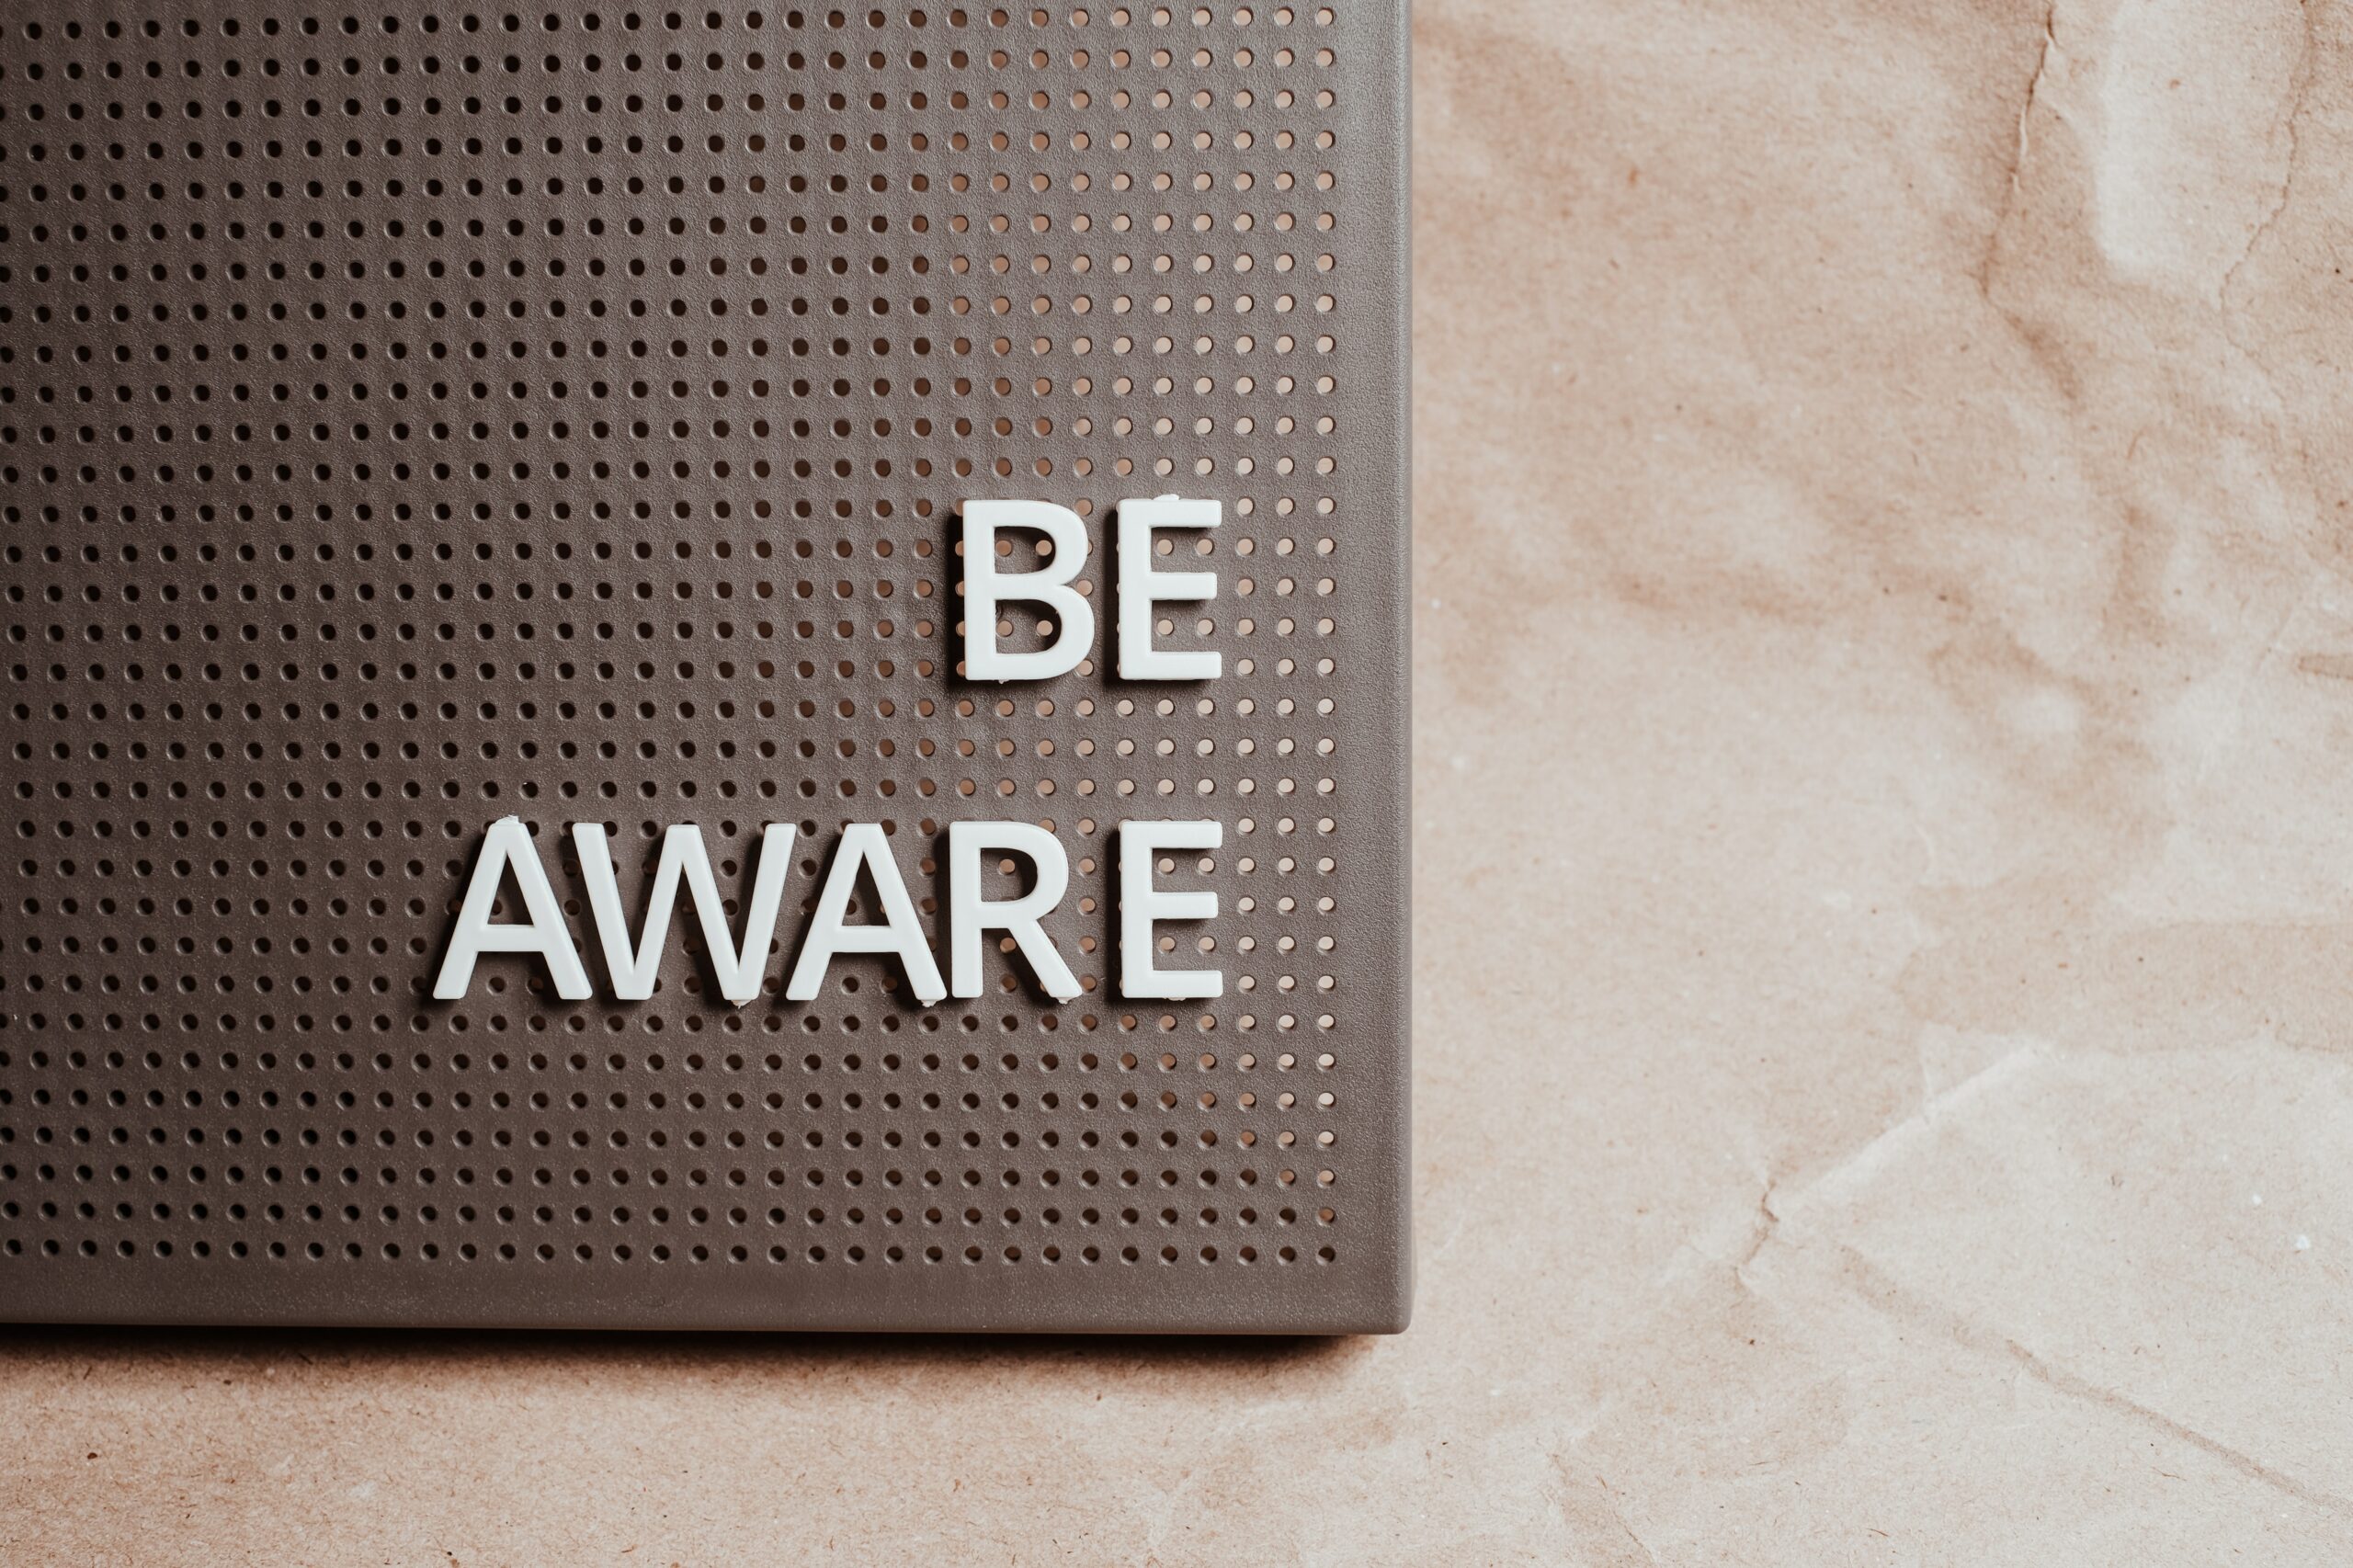 A brownish section of peg-board is shown to be covering about 50% of the picture, positioned mostly in the upper-left portion of the picture. In push-letters on the pegboard, it says "Be Aware".